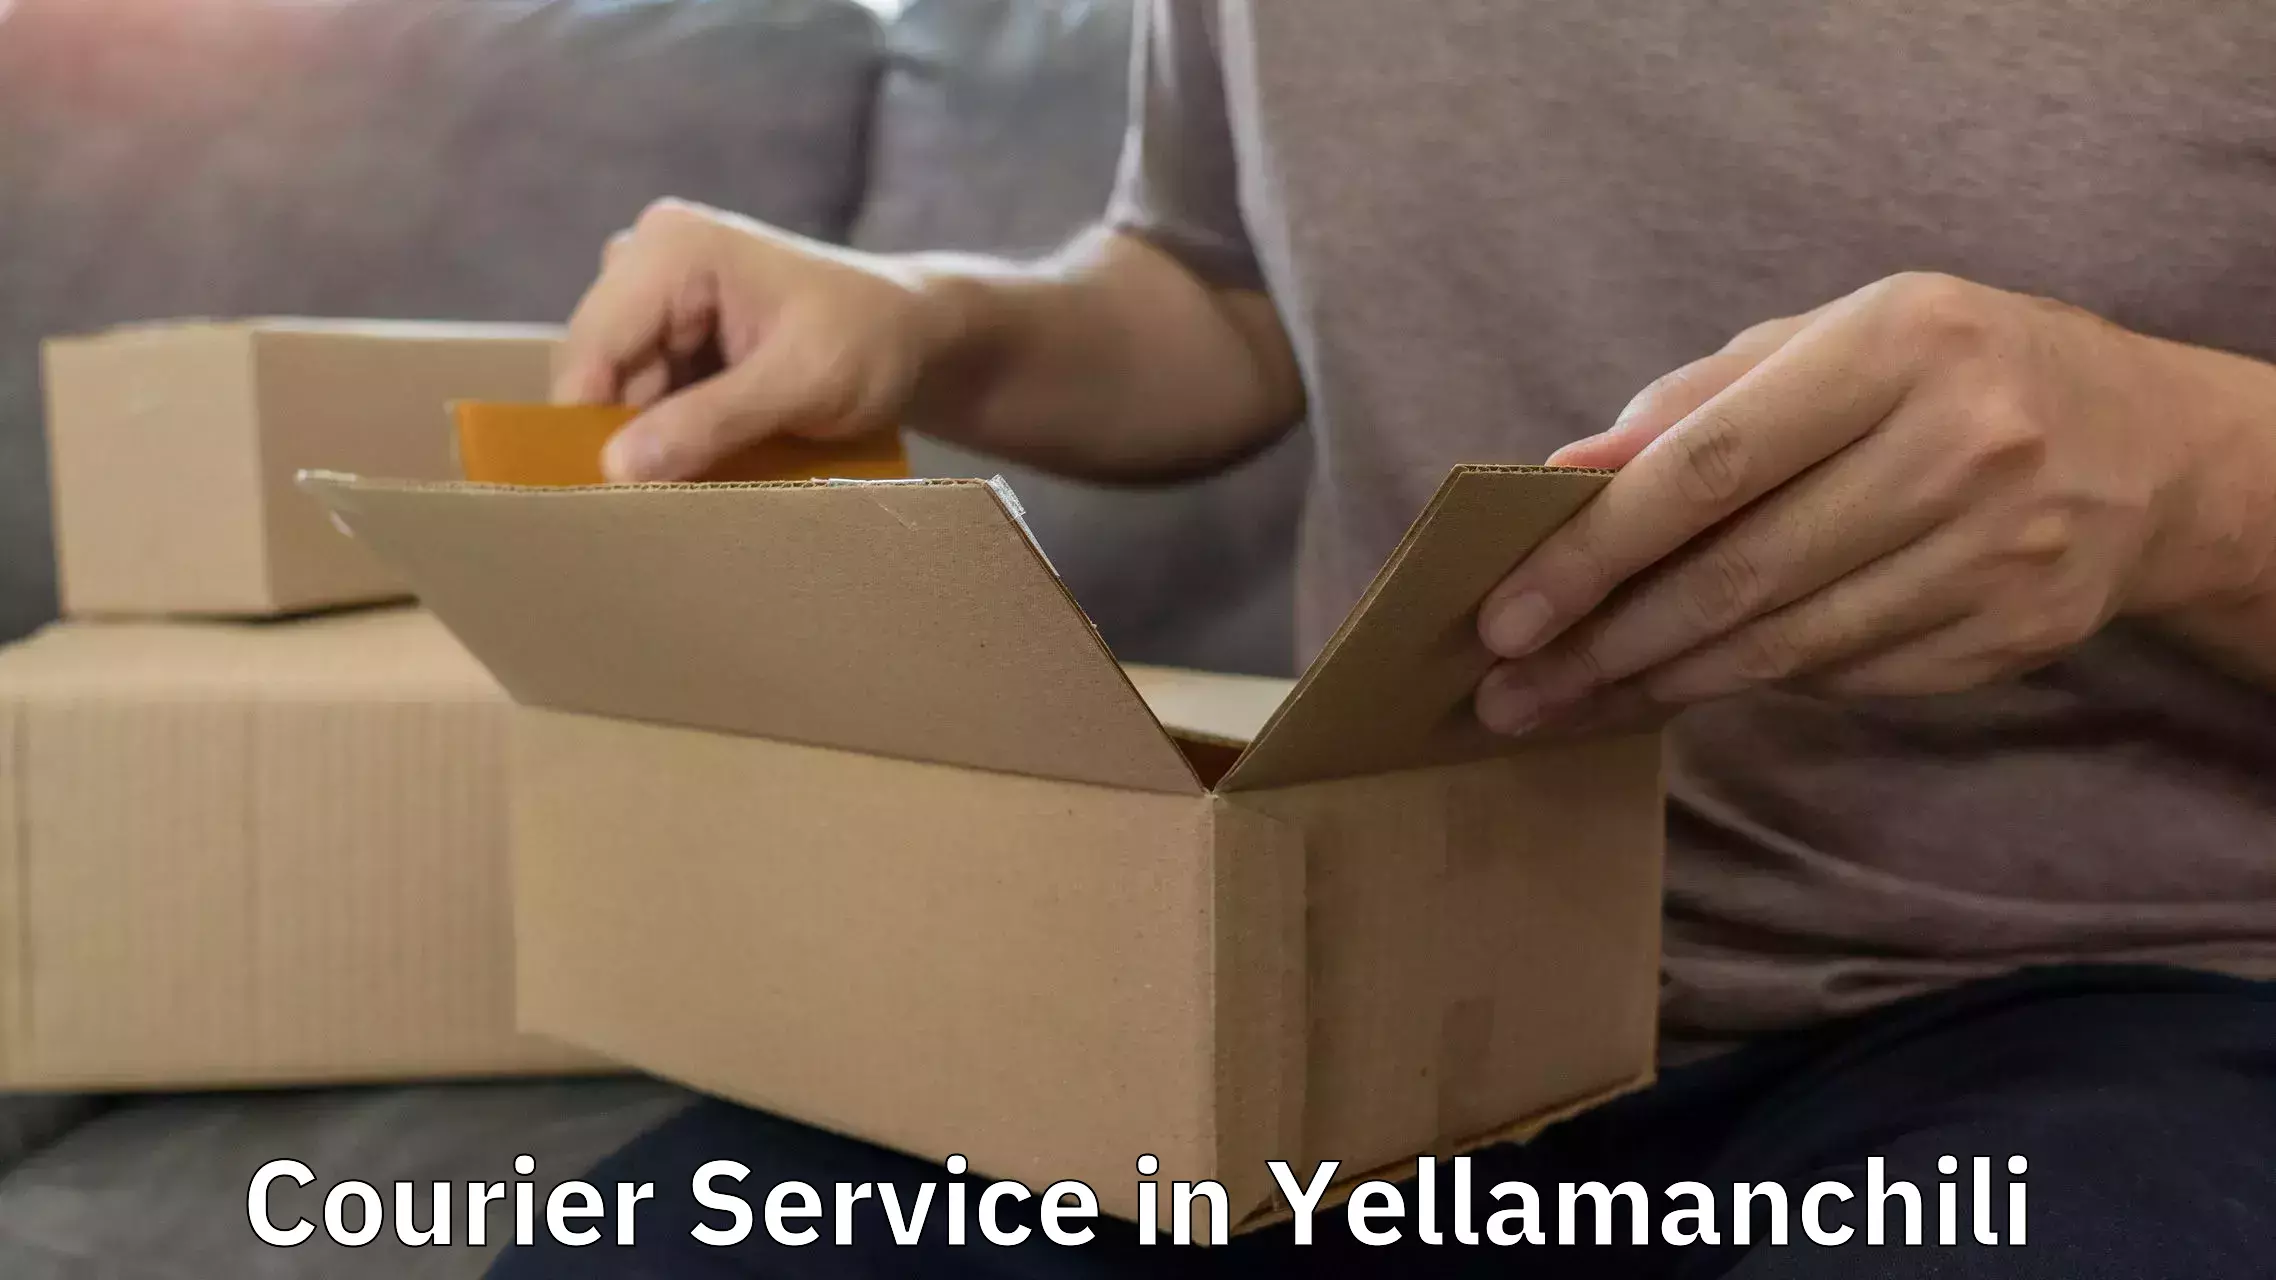 Customized delivery options in Yellamanchili